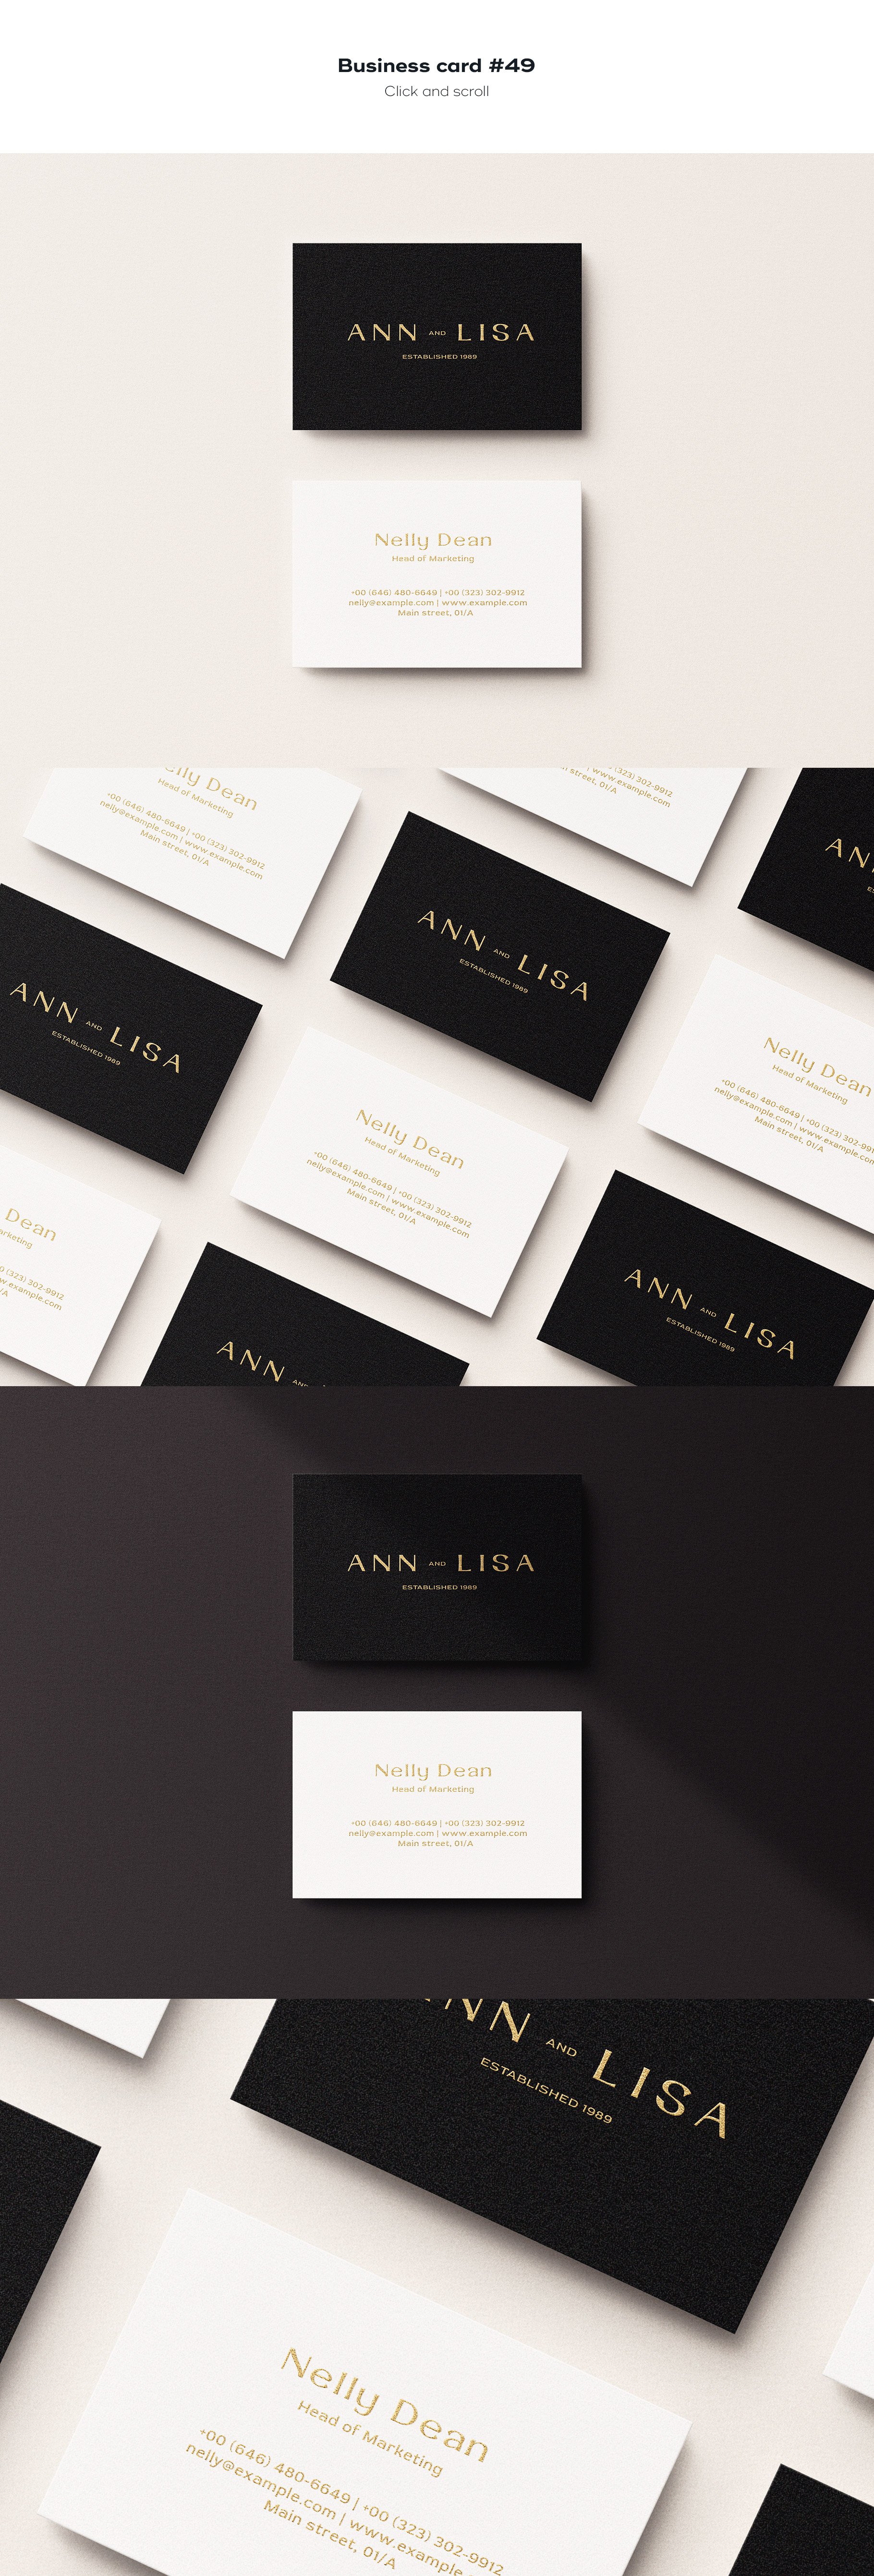 business card 49 812